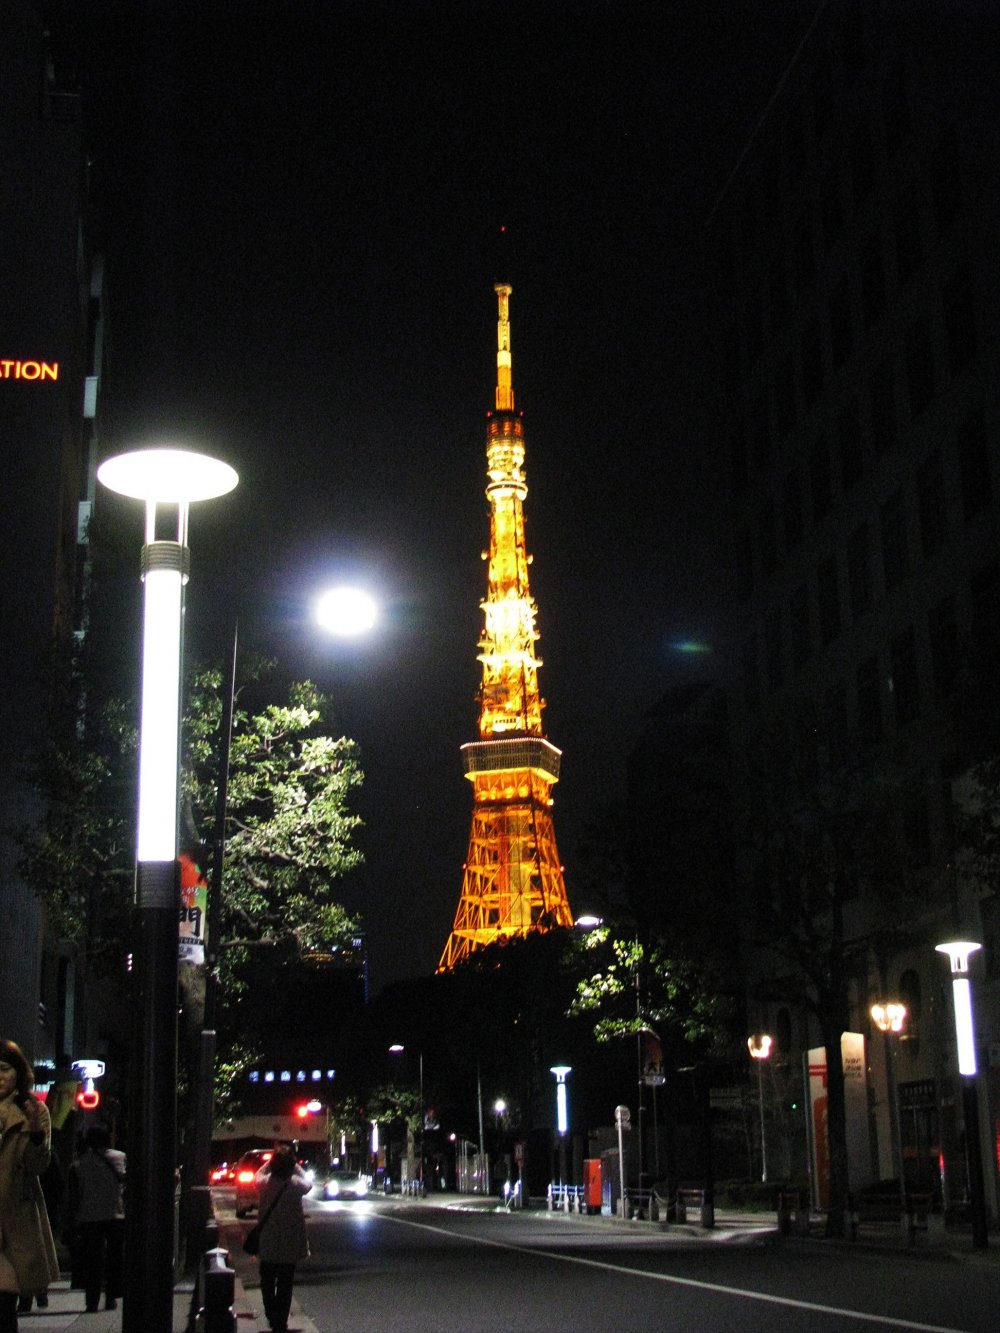 Wonderfully lit Tokyo Tower is seen from afar